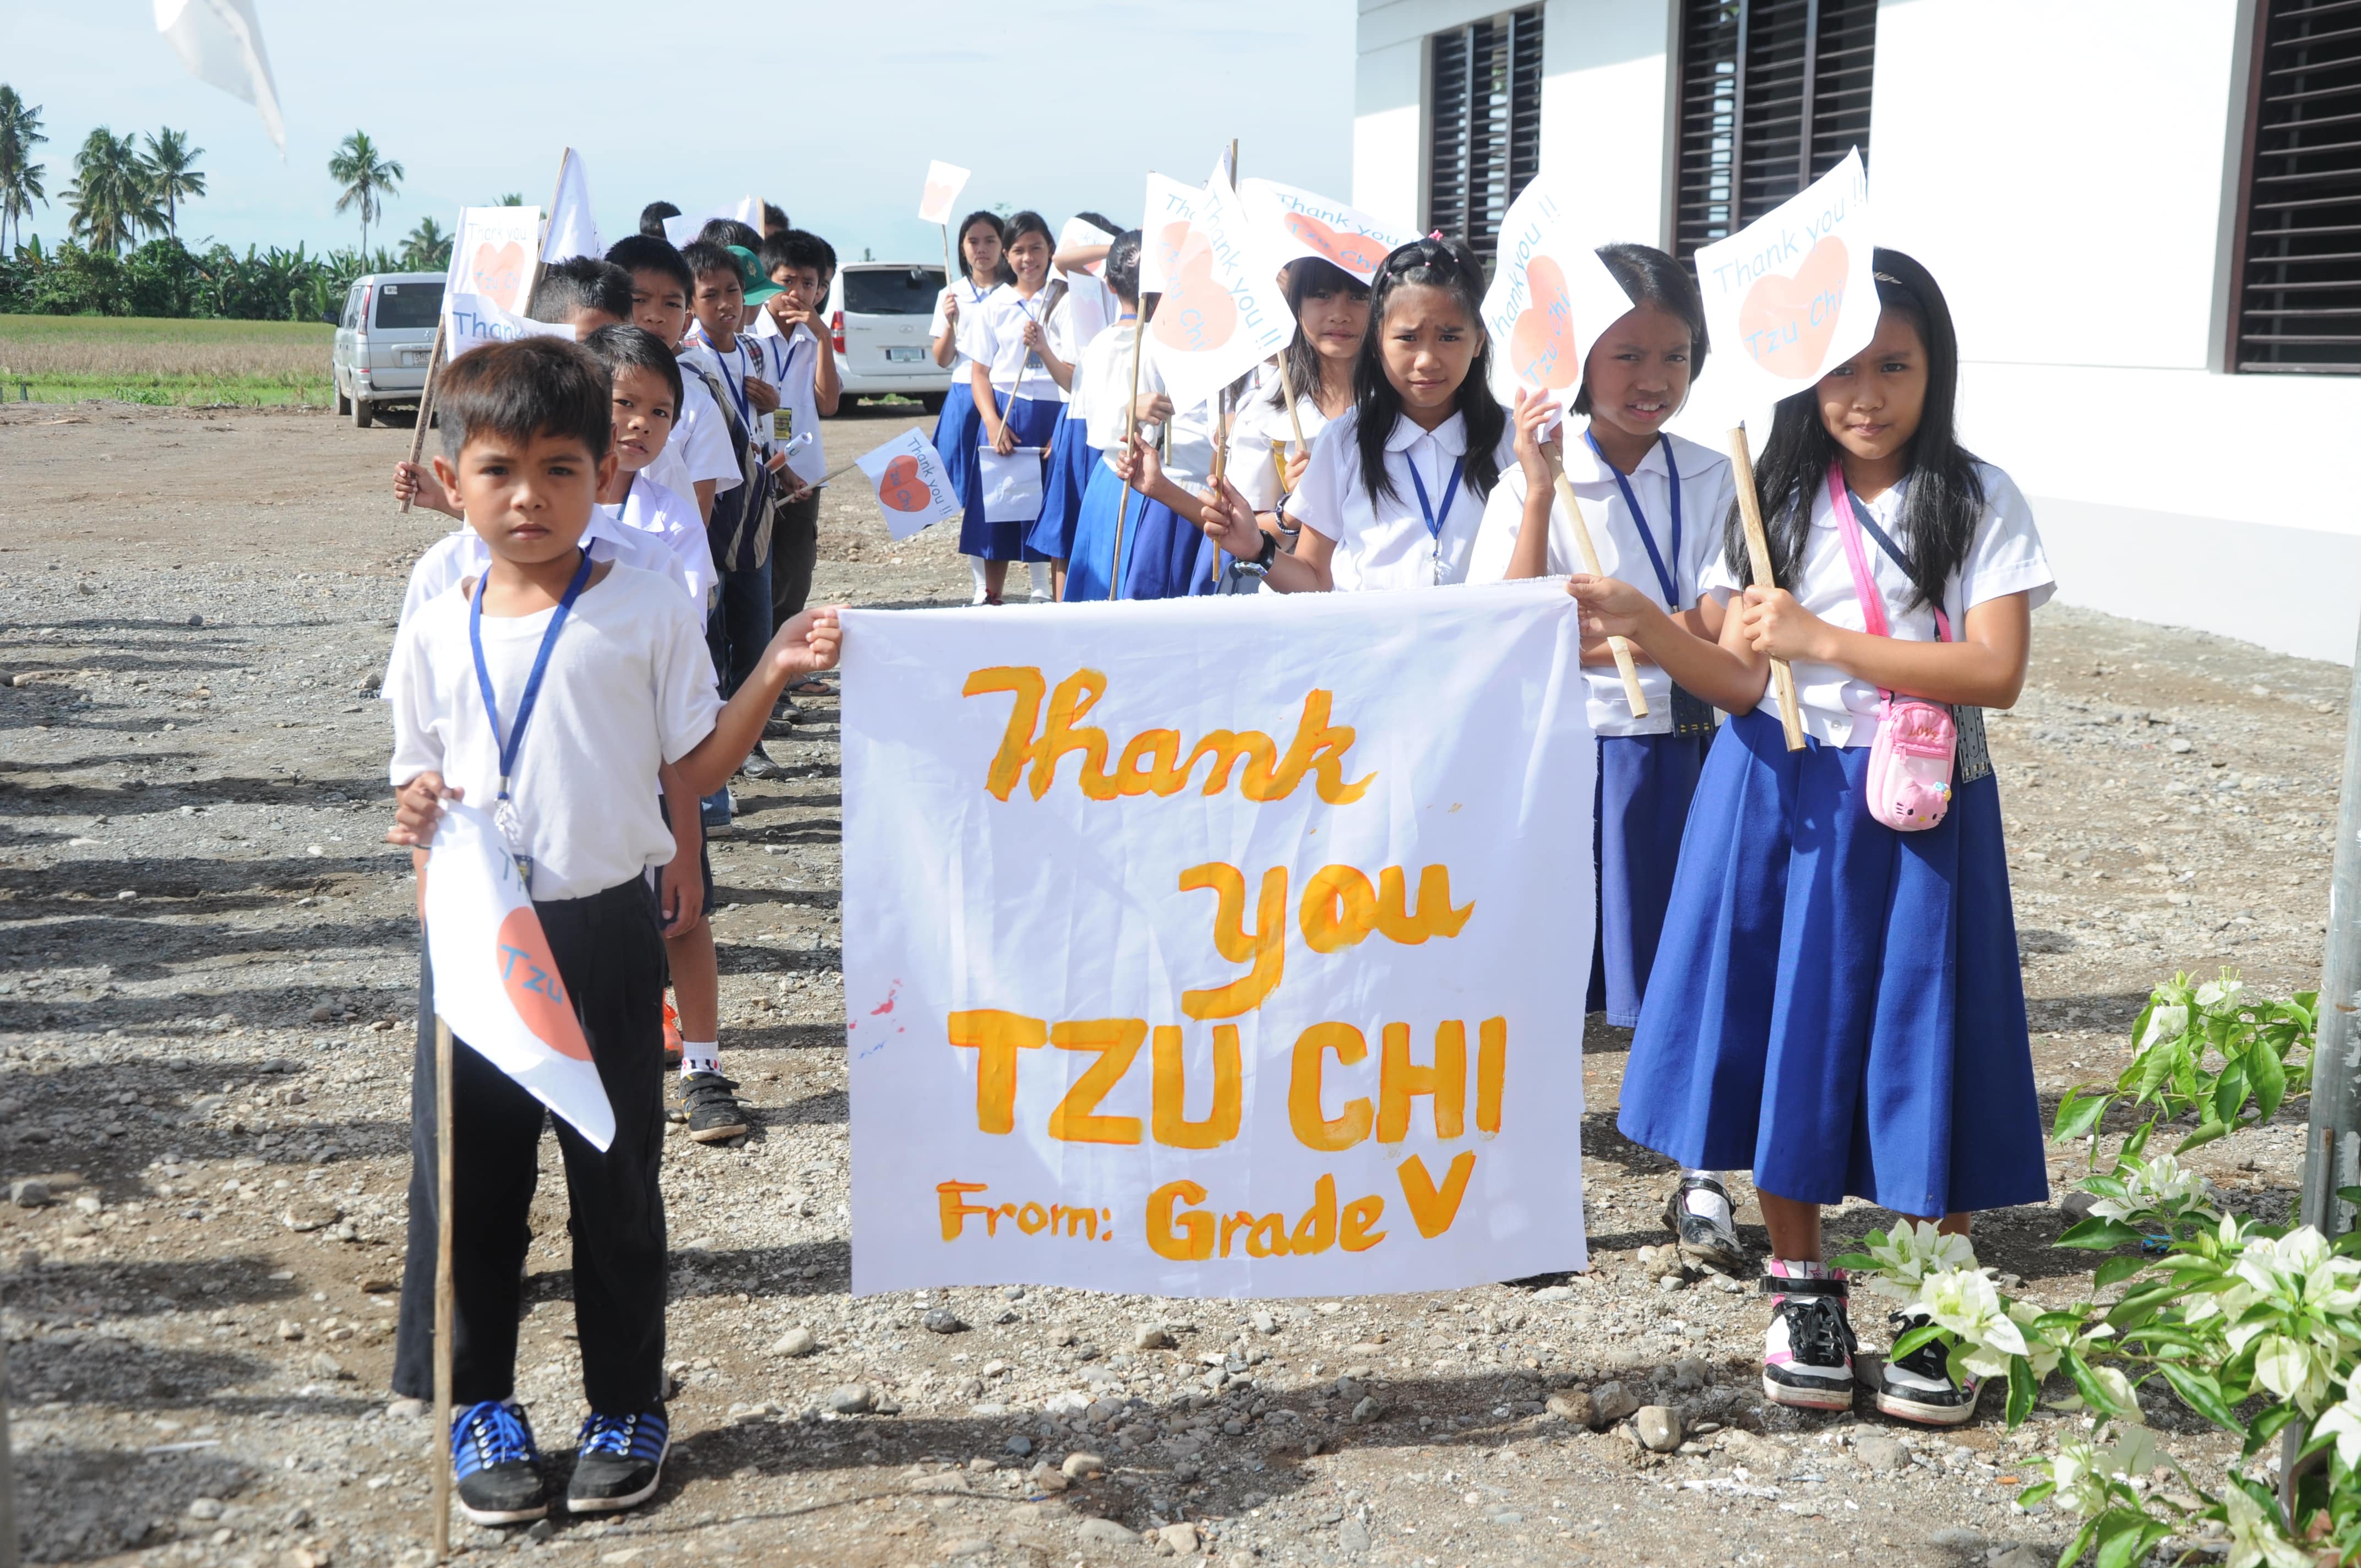 Mangayon Elementary School’s fifth graders form orderly lines to greet Tzu Chi volunteers in the turnover ceremony of their rebuilt school on December 1, 2014.